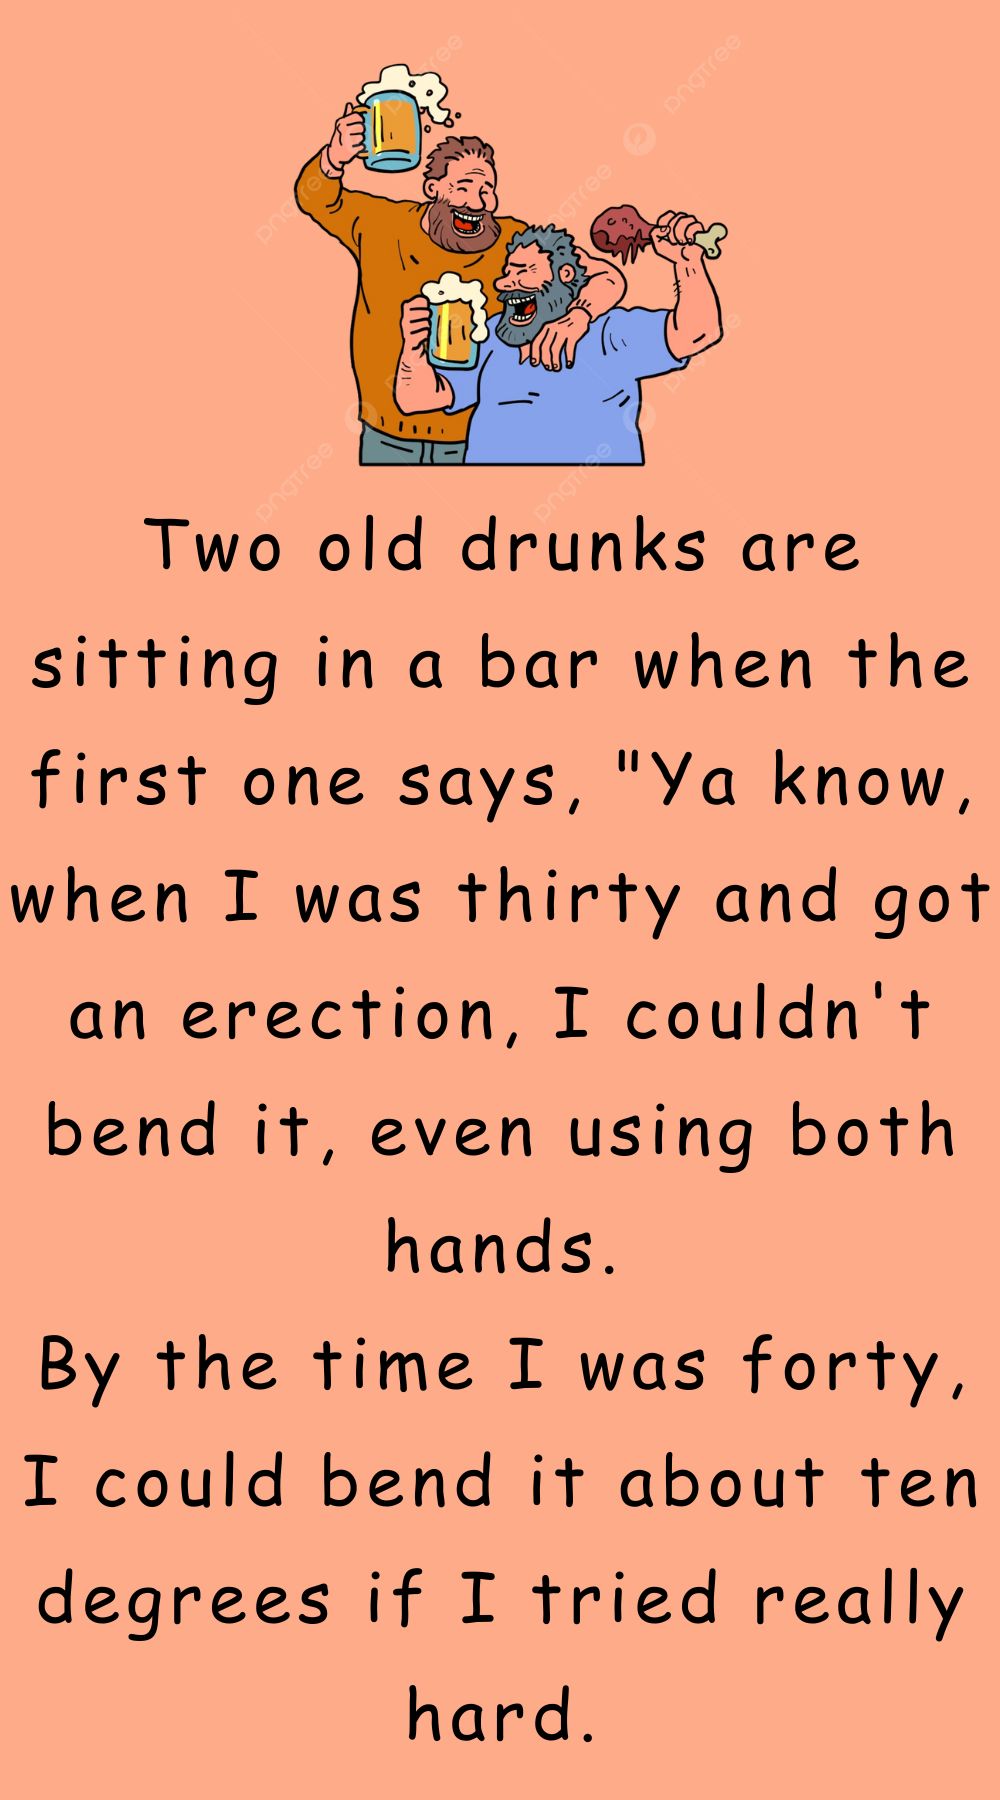 Two old drunks are sitting in a bar